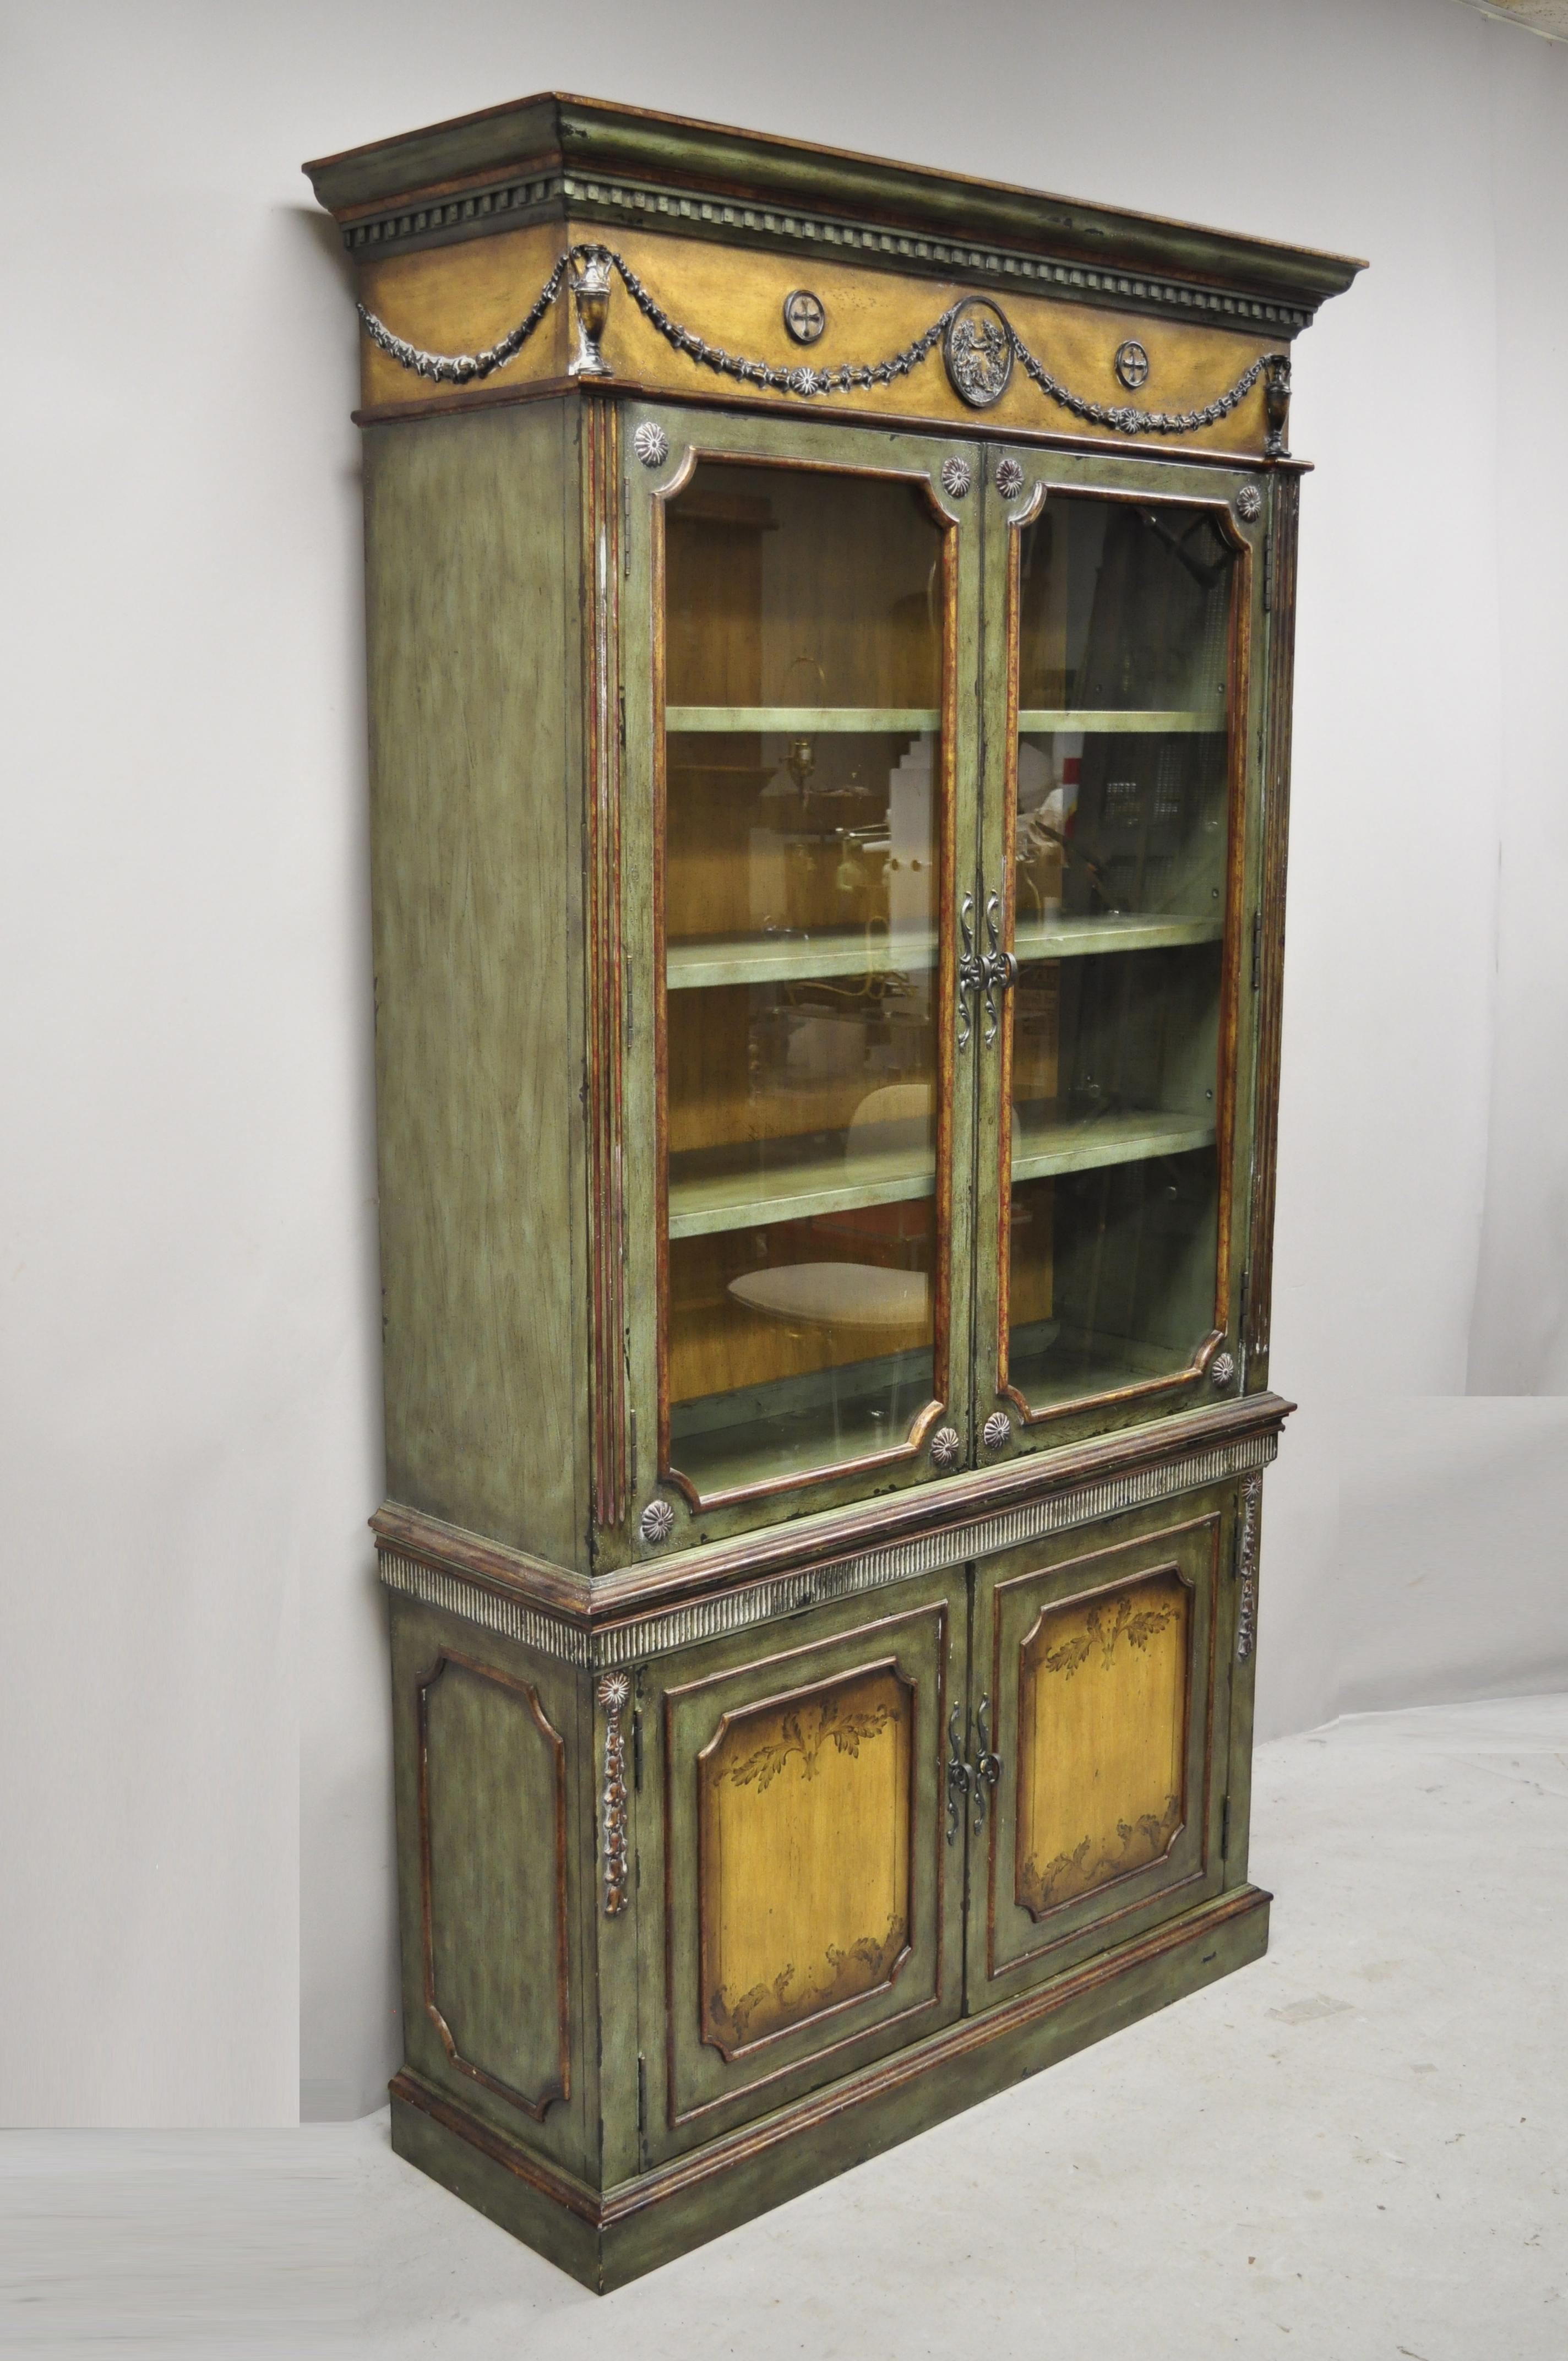 Domain Home Fashions French Country Provincial style green distress painted cupboard cabinet hutch. Item features distressed finish, nicely carved details, 2 part construction, 2 glass swing doors, original label, 4 adjustable shelves, circa 21st